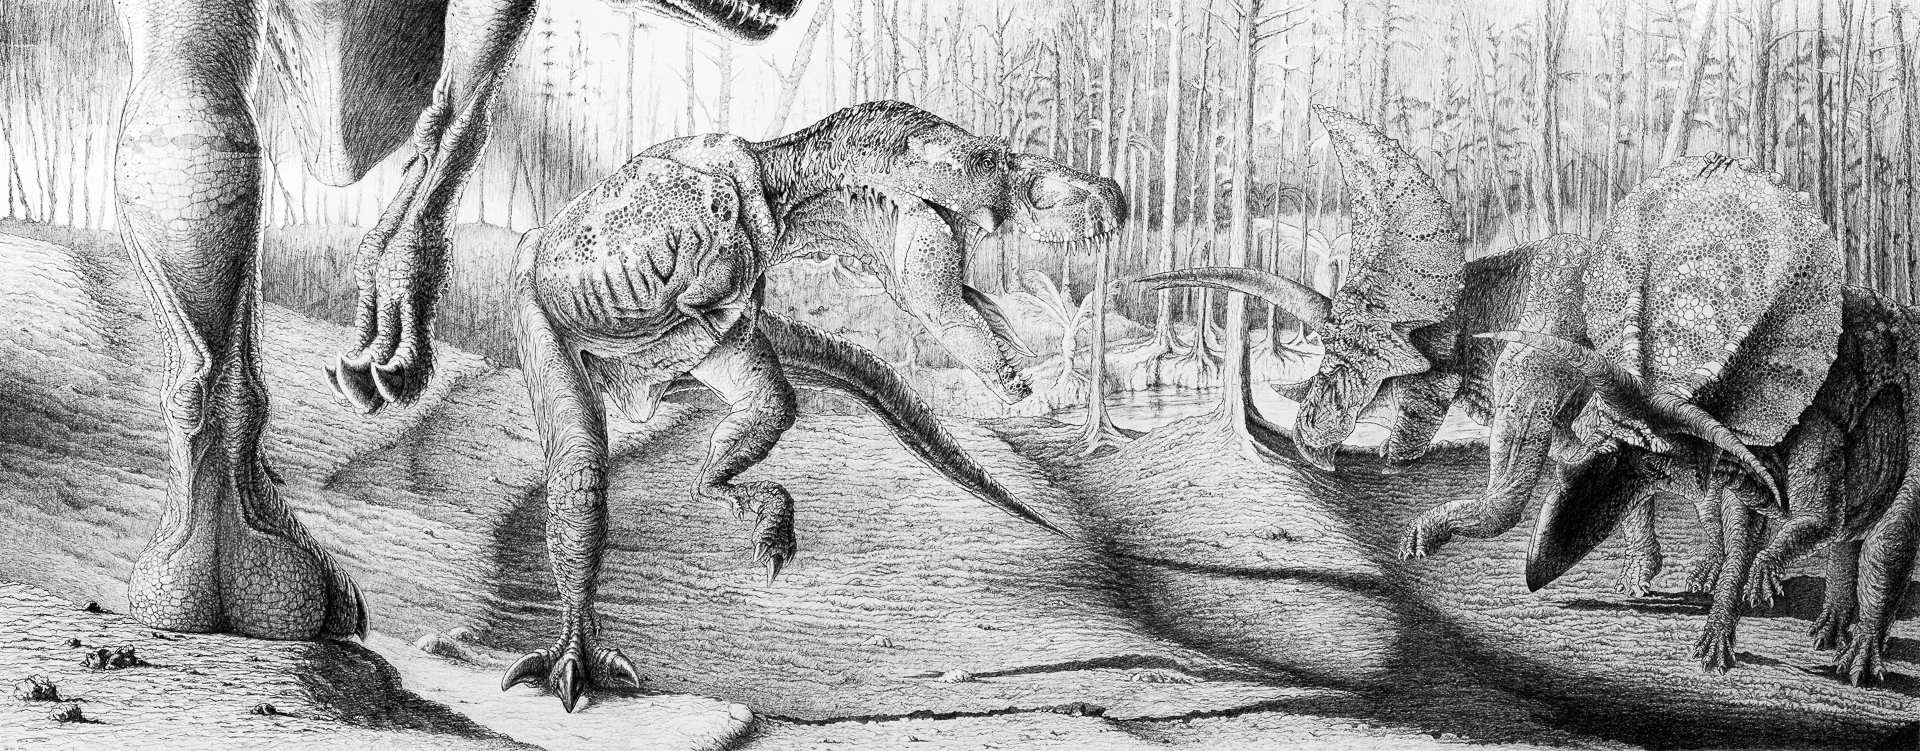 War Cry, Tyrannosaurus rex, Triceratops, forest, Cretaceous, theropod, ceratopsian, sunset, pencil sketch, gesso, black and white